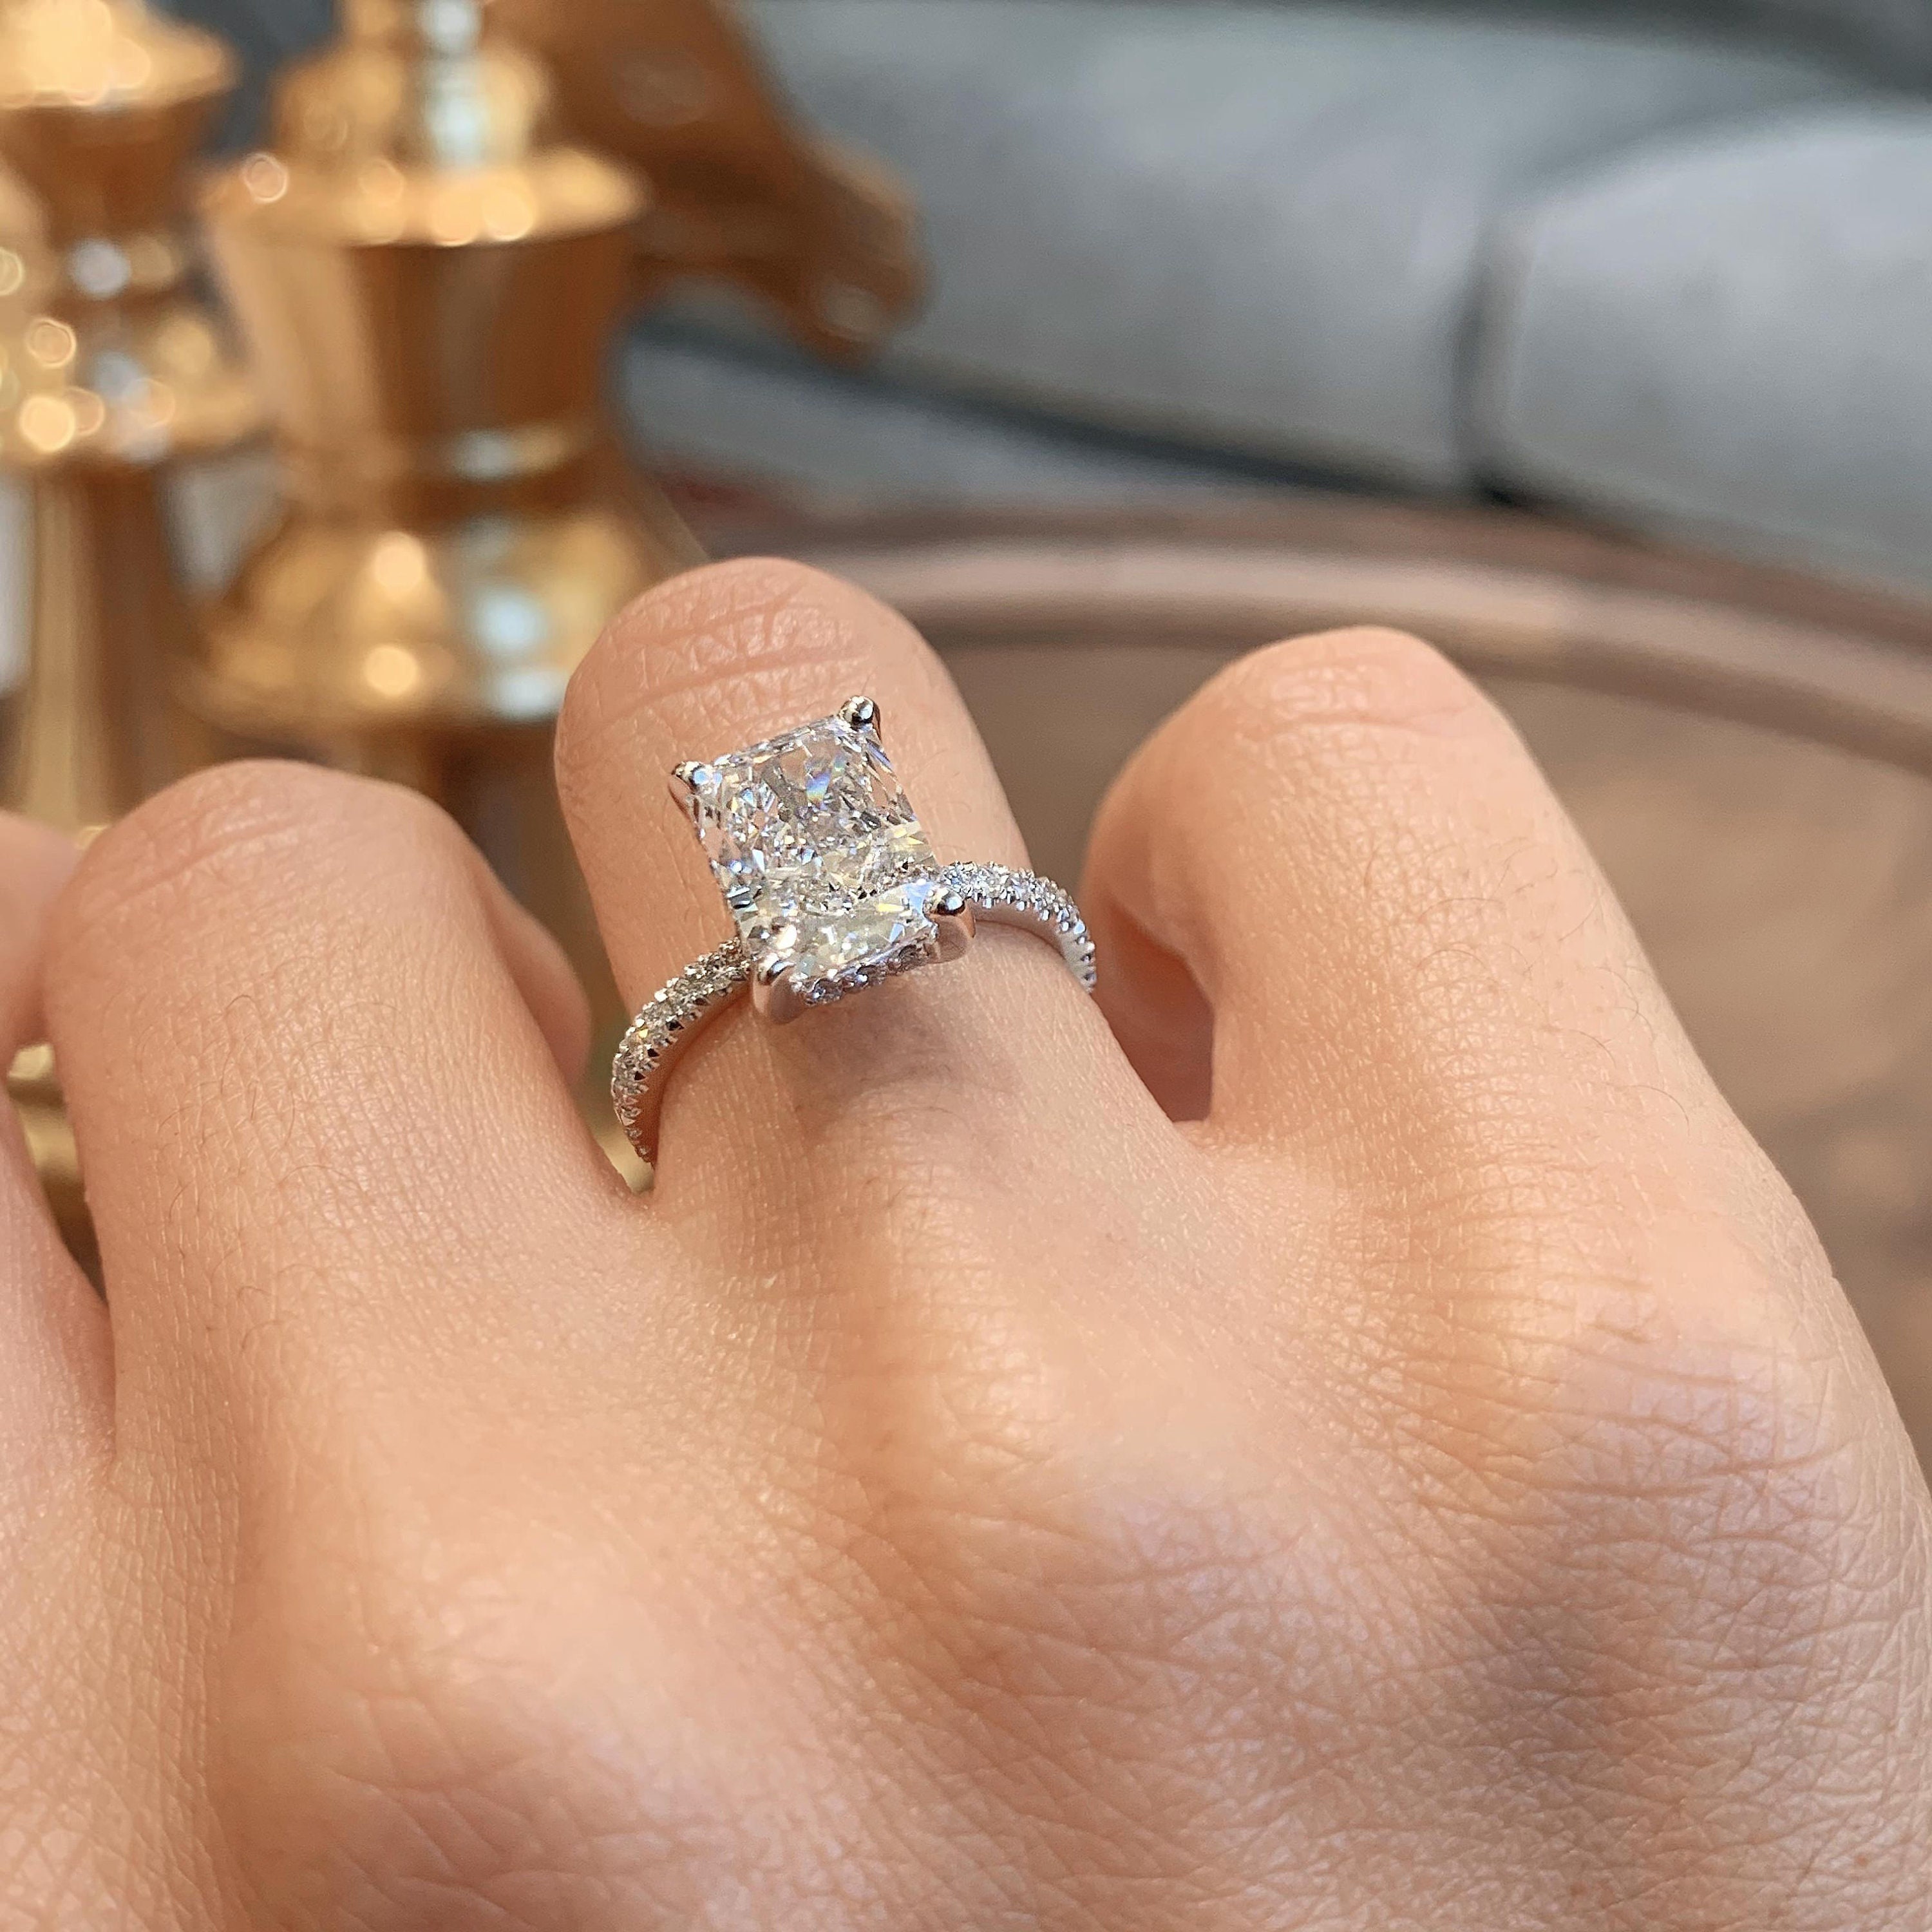 Pin by Alexia Lima on Wed | Huge diamond engagement rings, Big engagement  rings, Huge engagement rings